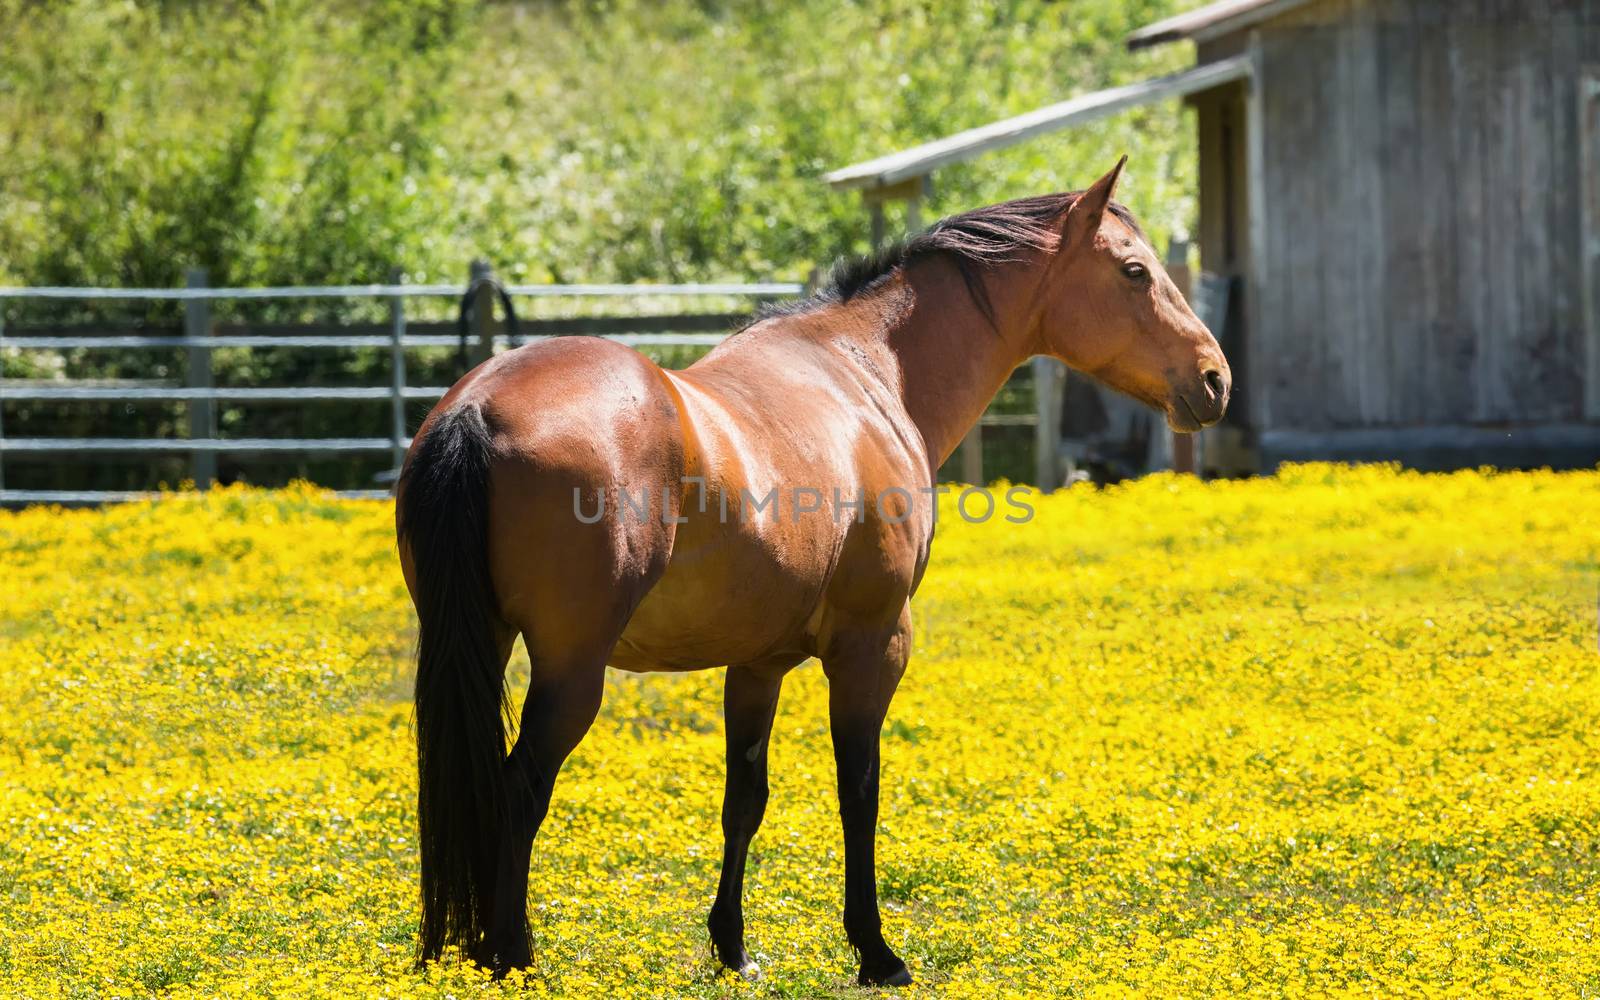 Horse at a Farm in Northern Californa by backyard_photography